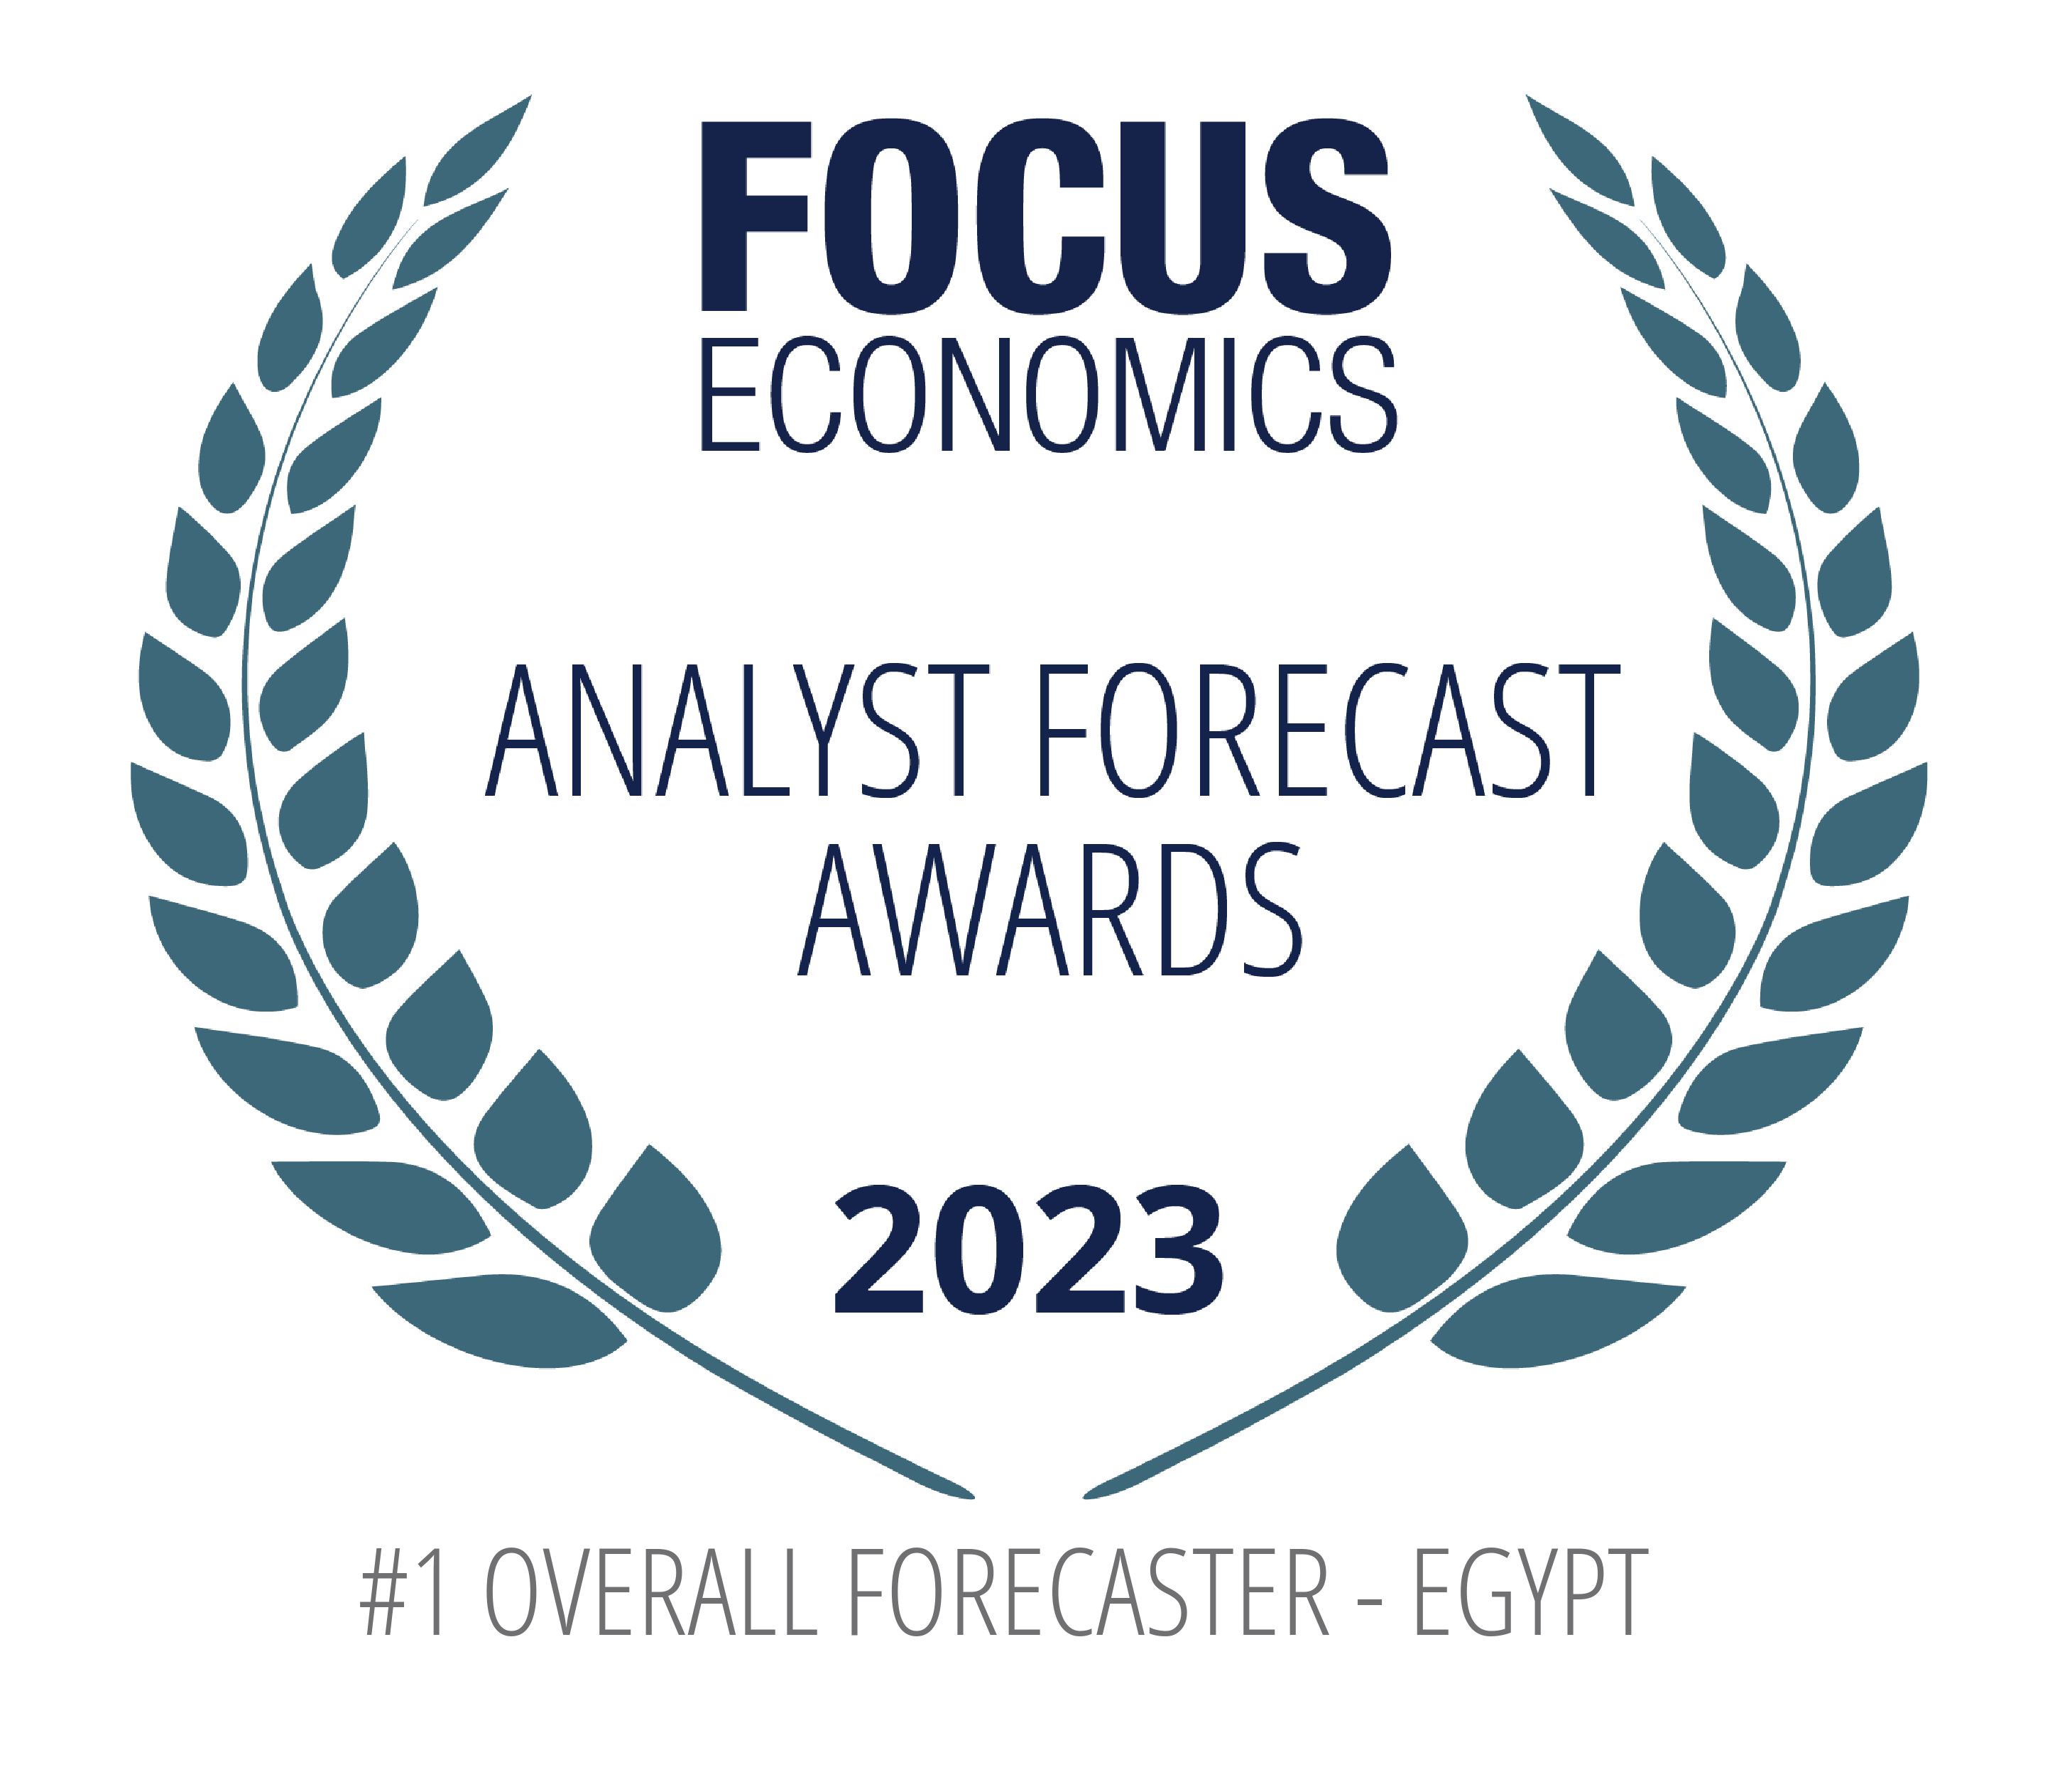 HC Brokerage has been awarded the Best Overall Forecaster for Egypt in 2023